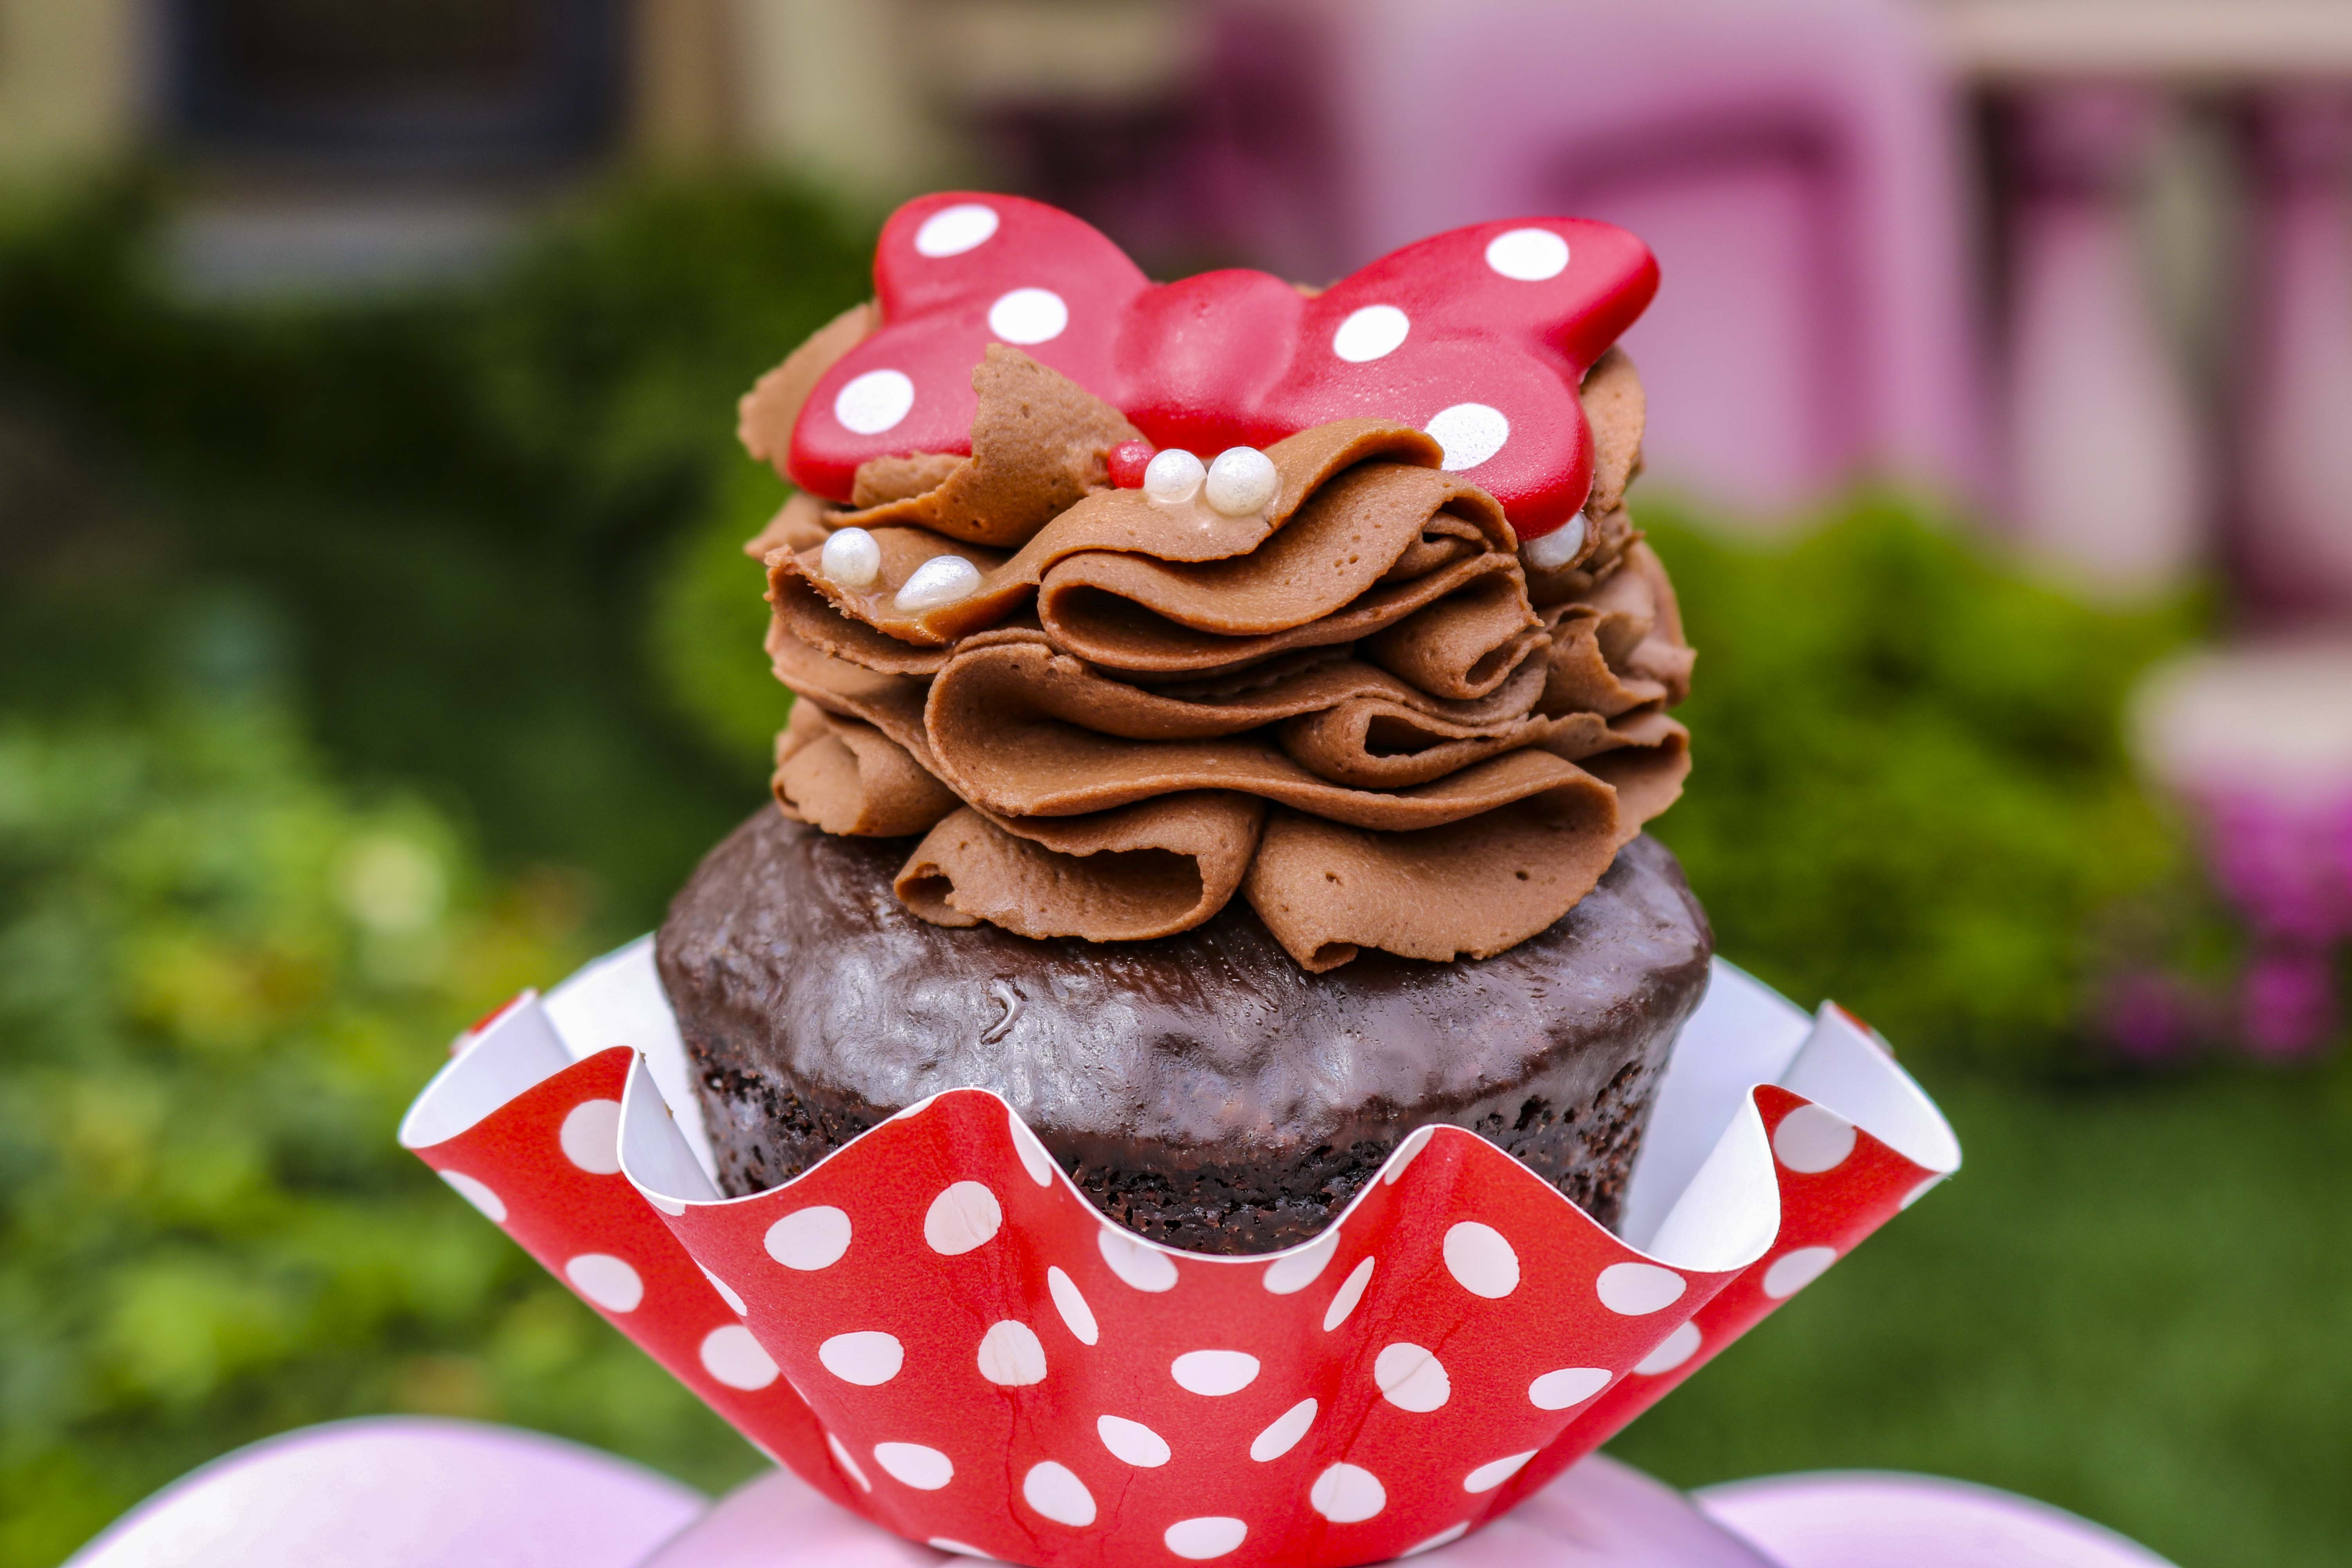 The Minnie Mouse brownie is the perfect treat to share in a sweet moment with your loved ones. 